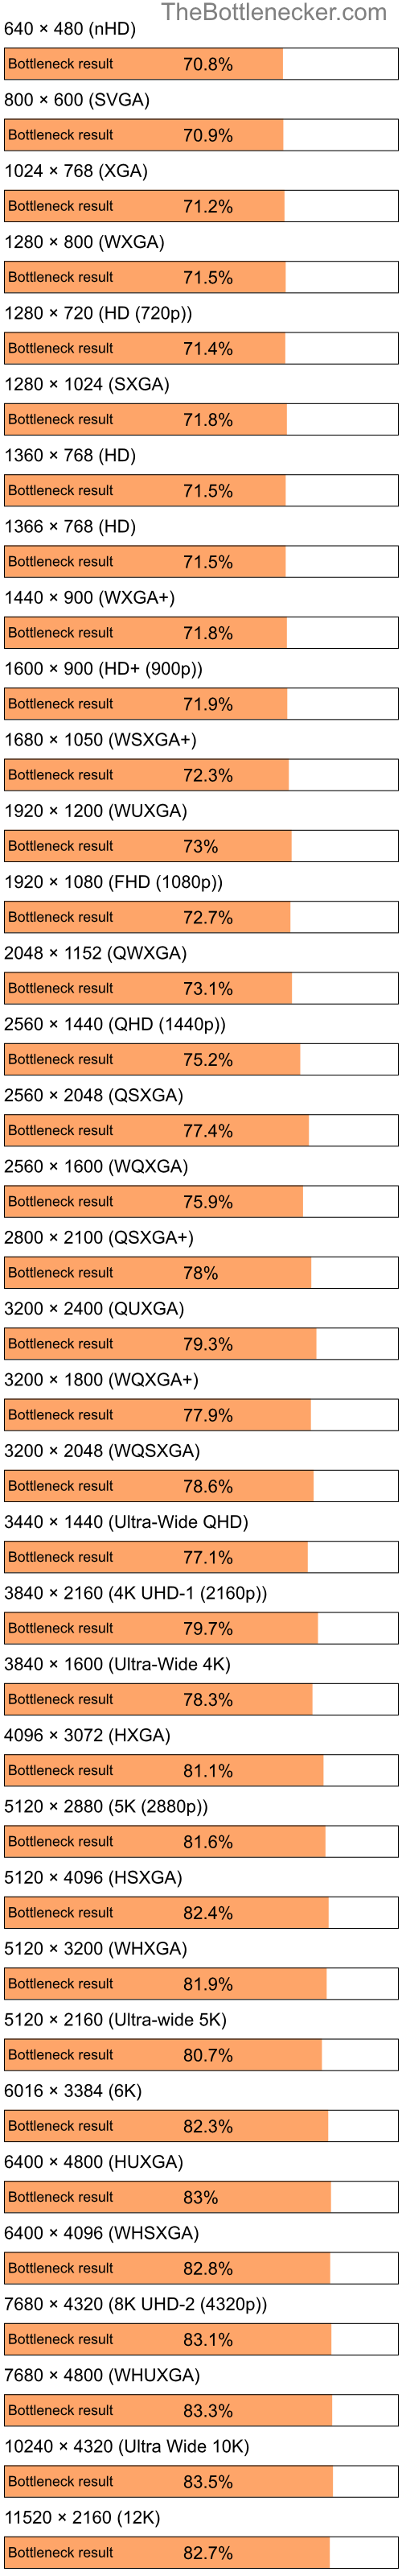 Bottleneck results by resolution for Intel Celeron and NVIDIA GeForce 8600 GS in Graphic Card Intense Tasks